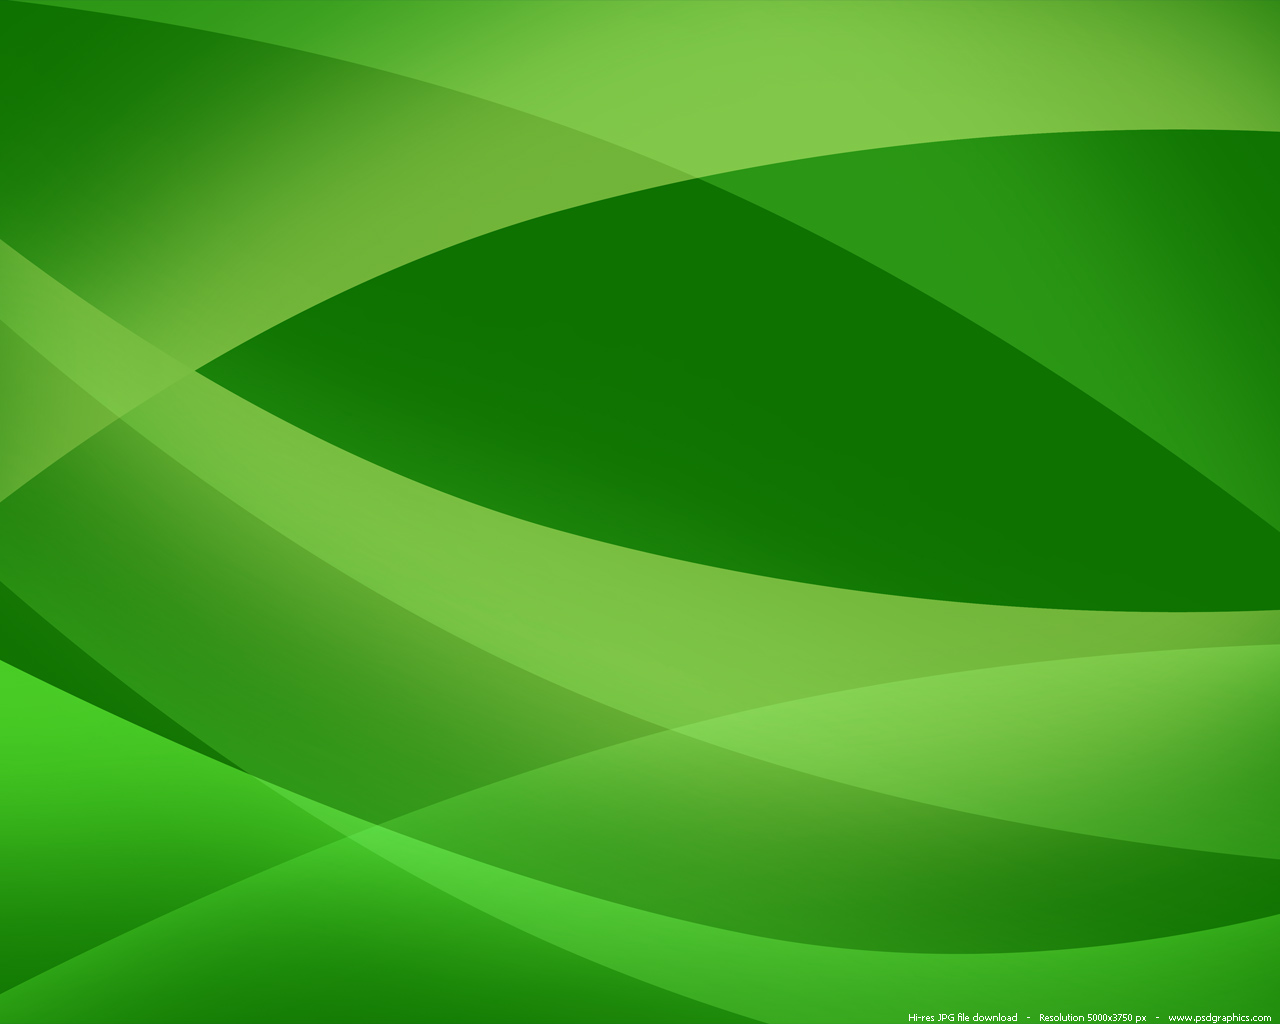 Abstract Layout Designs Blue And Green Background Psdgraphics